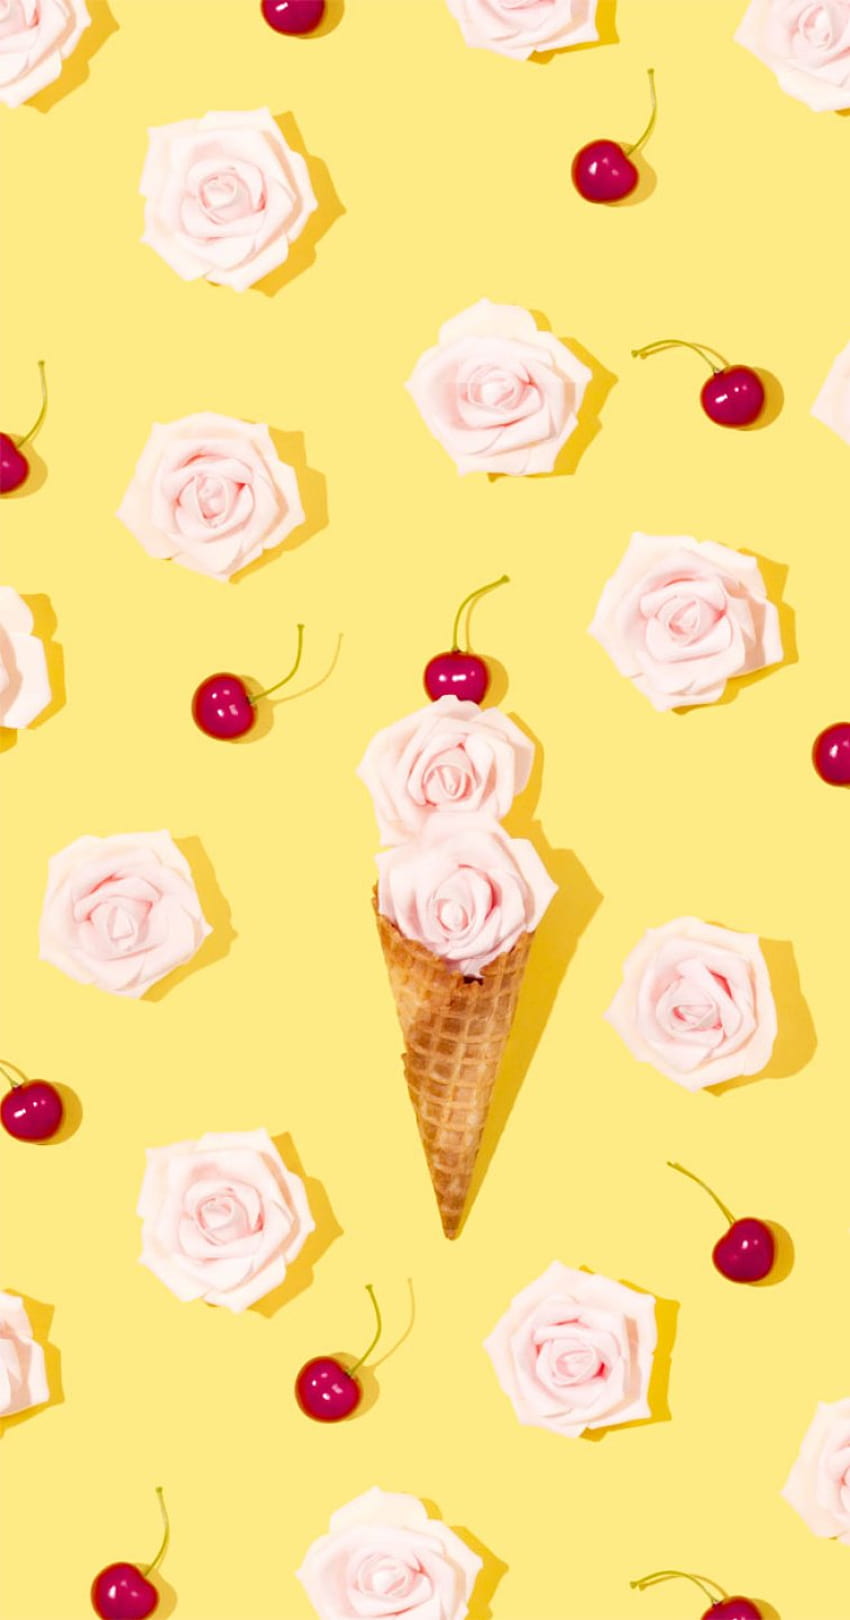 Ice cream cone and roses with cheerful yellow backgrounds, summer yellow aesthetic HD phone wallpaper